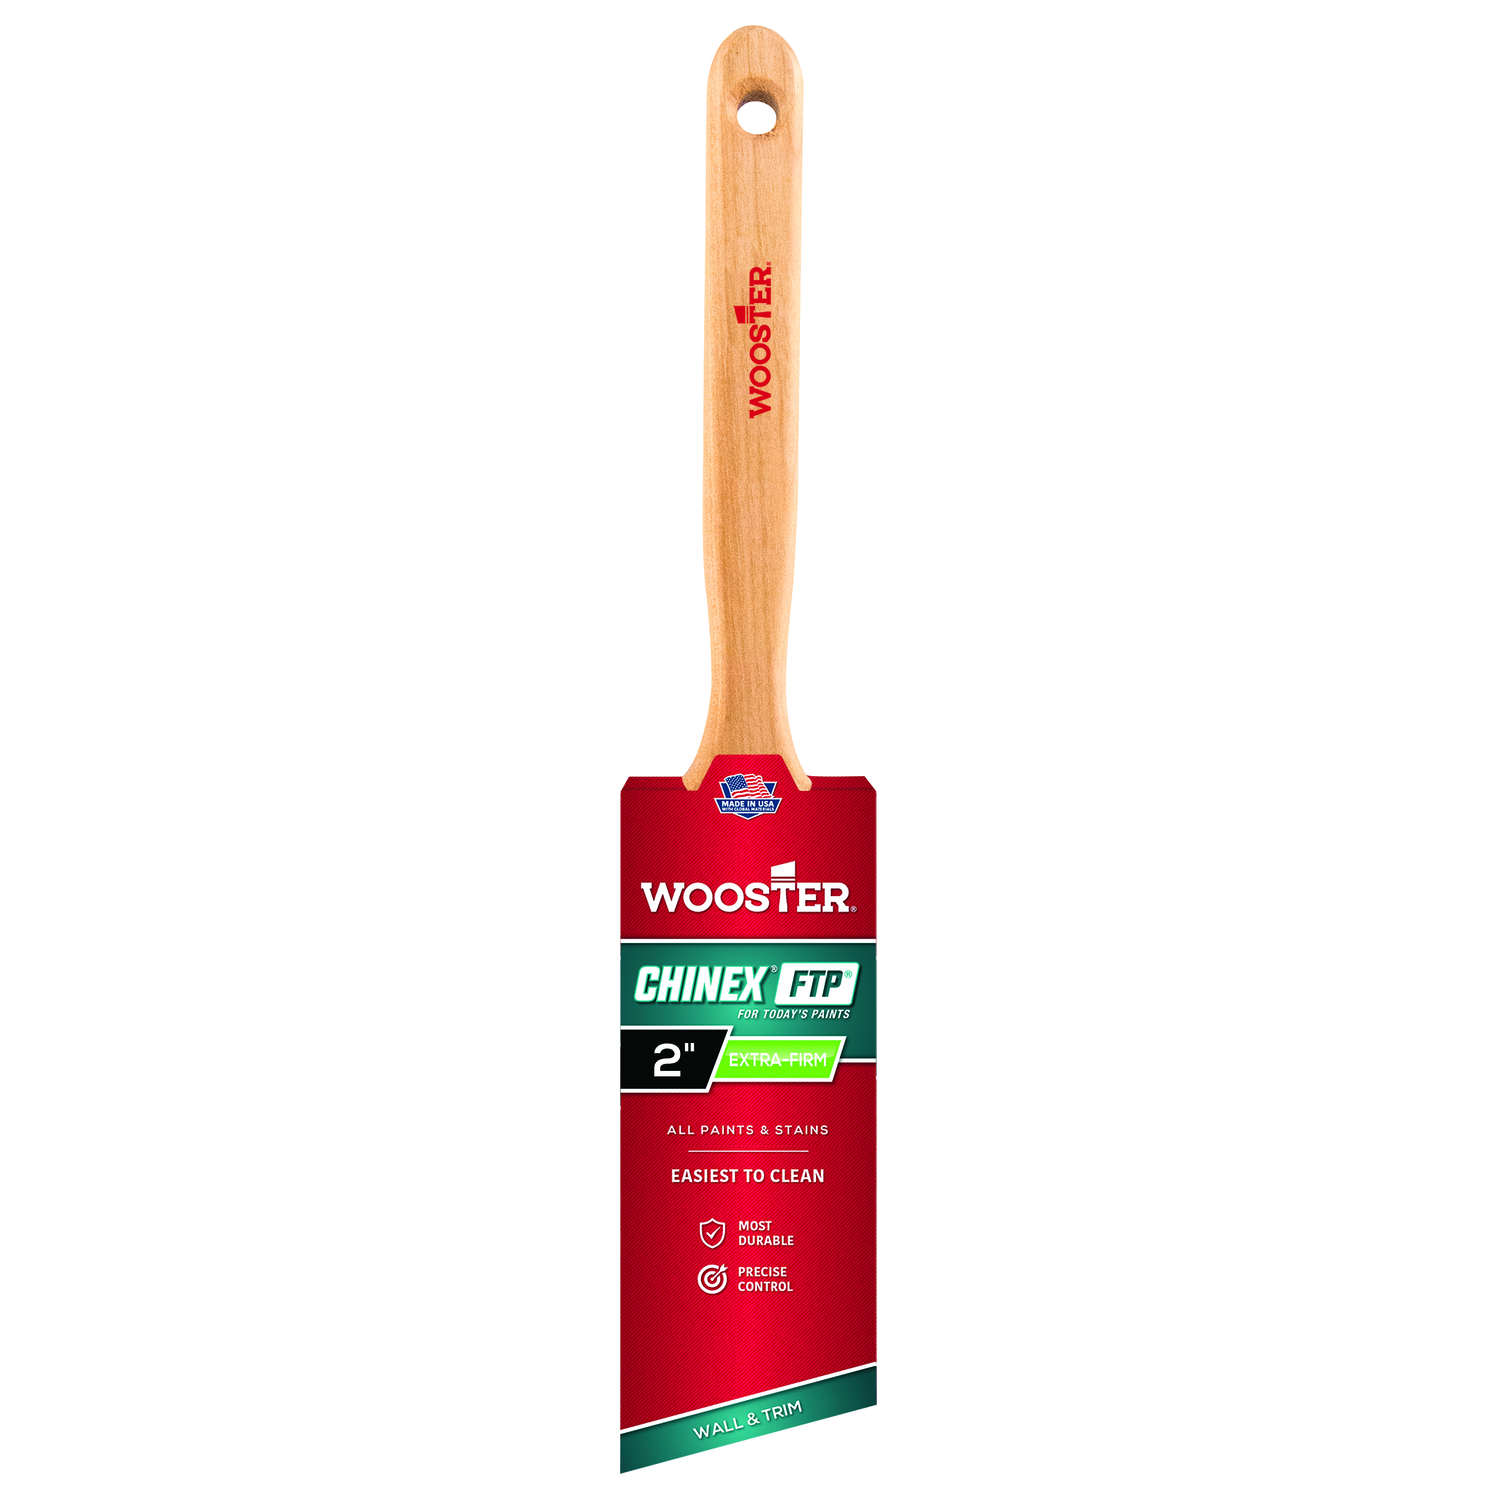 Photos - Putty Knife / Painting Tool Wooster Chinex FTP 2 in. Angle Oil-Based Paint Brush 4410-2